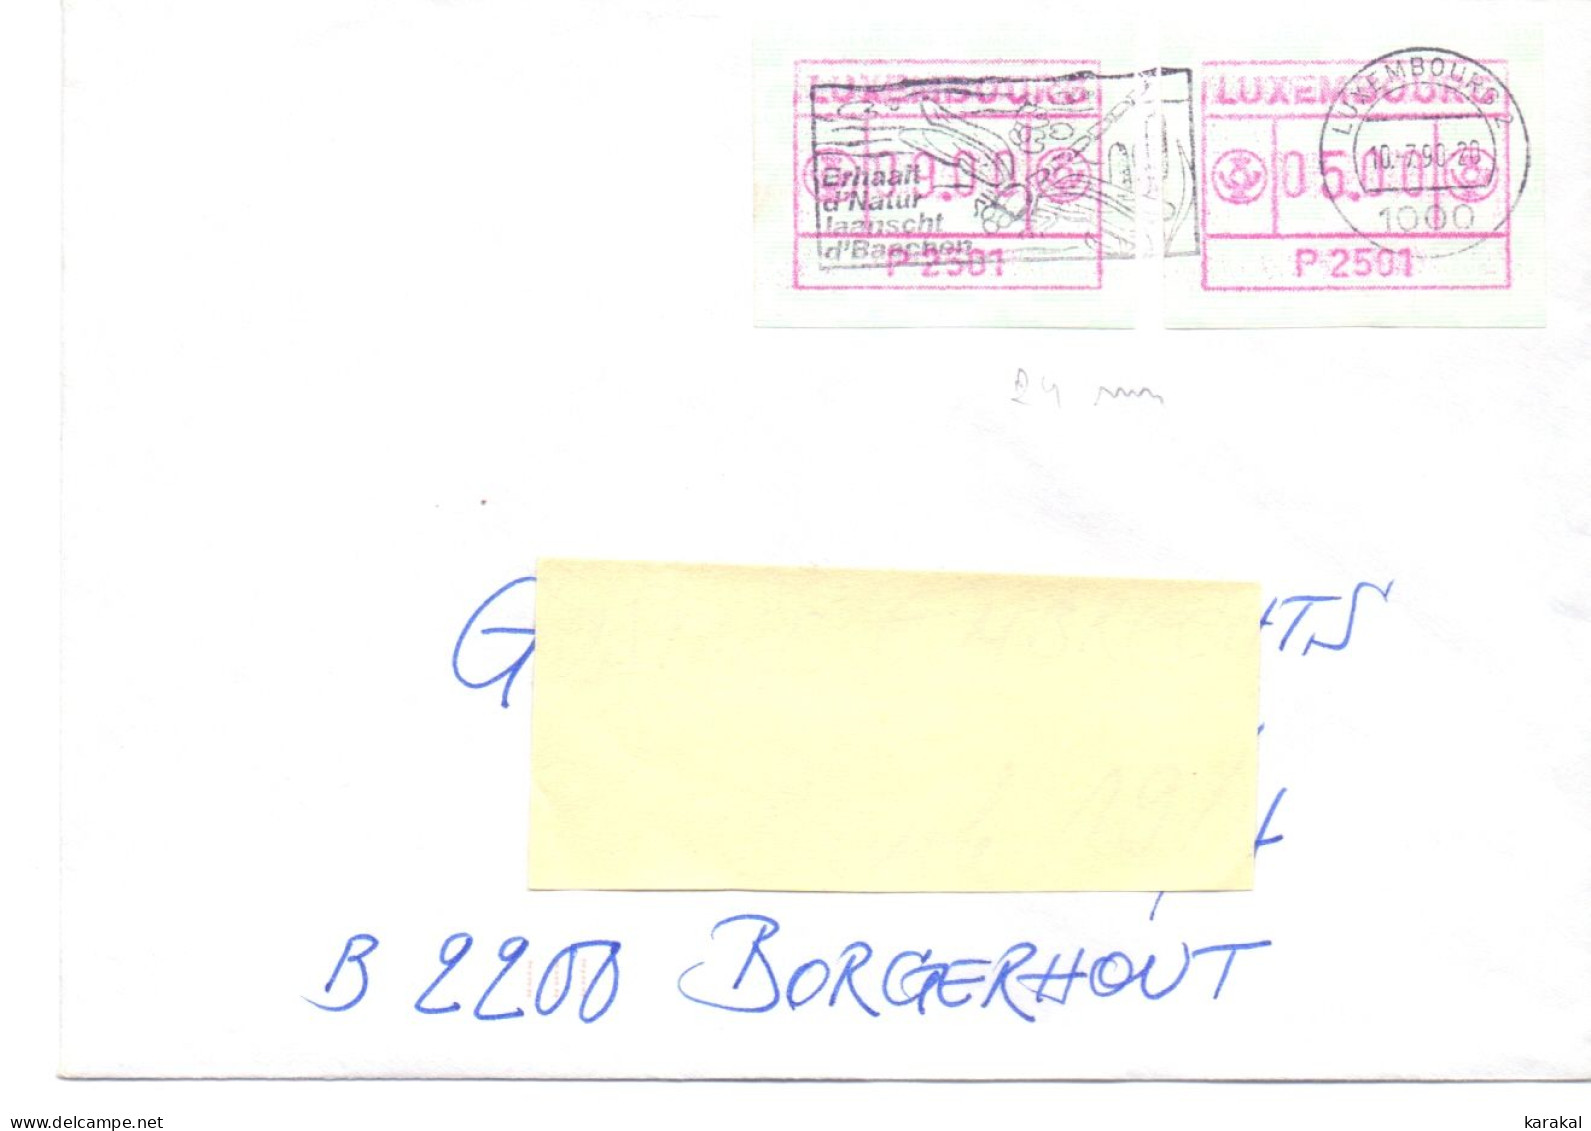 Luxembourg ATM Frama MiNr. 1.1 P2501 Firefly Libellule On Circulated Letter To Borgerhout Belgium 1990 - Frankeervignetten